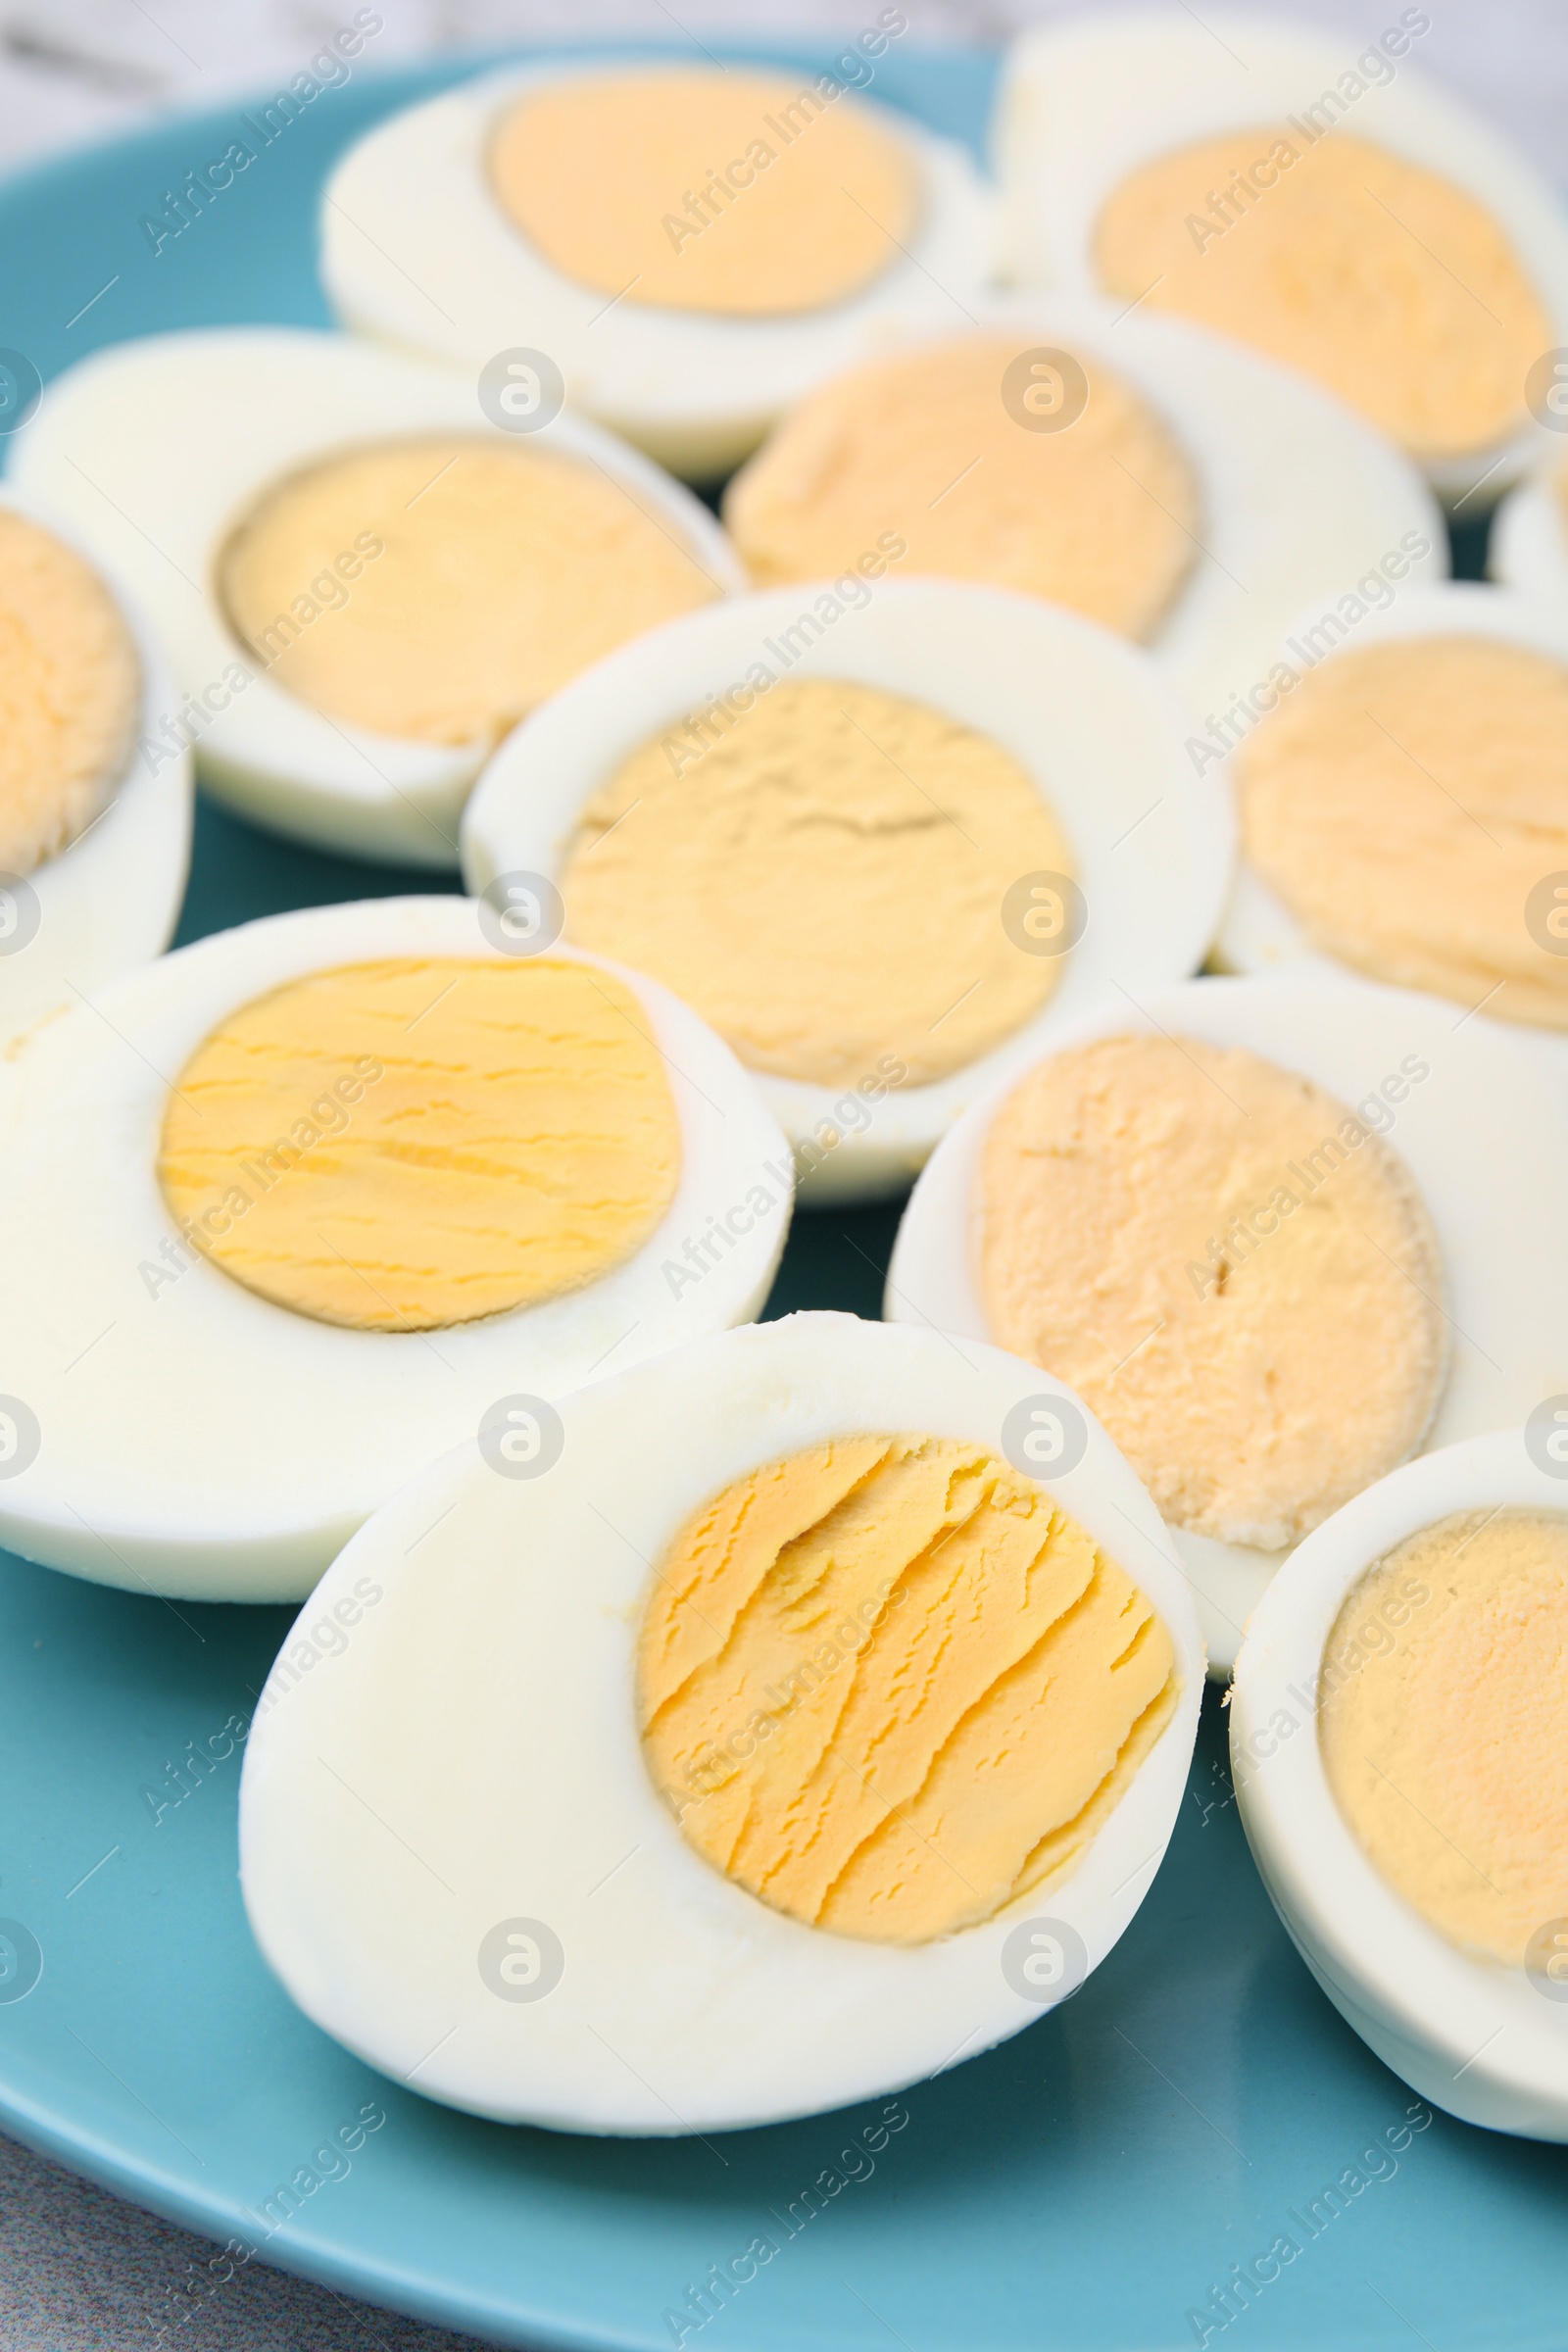 Photo of Plate with fresh hard boiled eggs, closeup